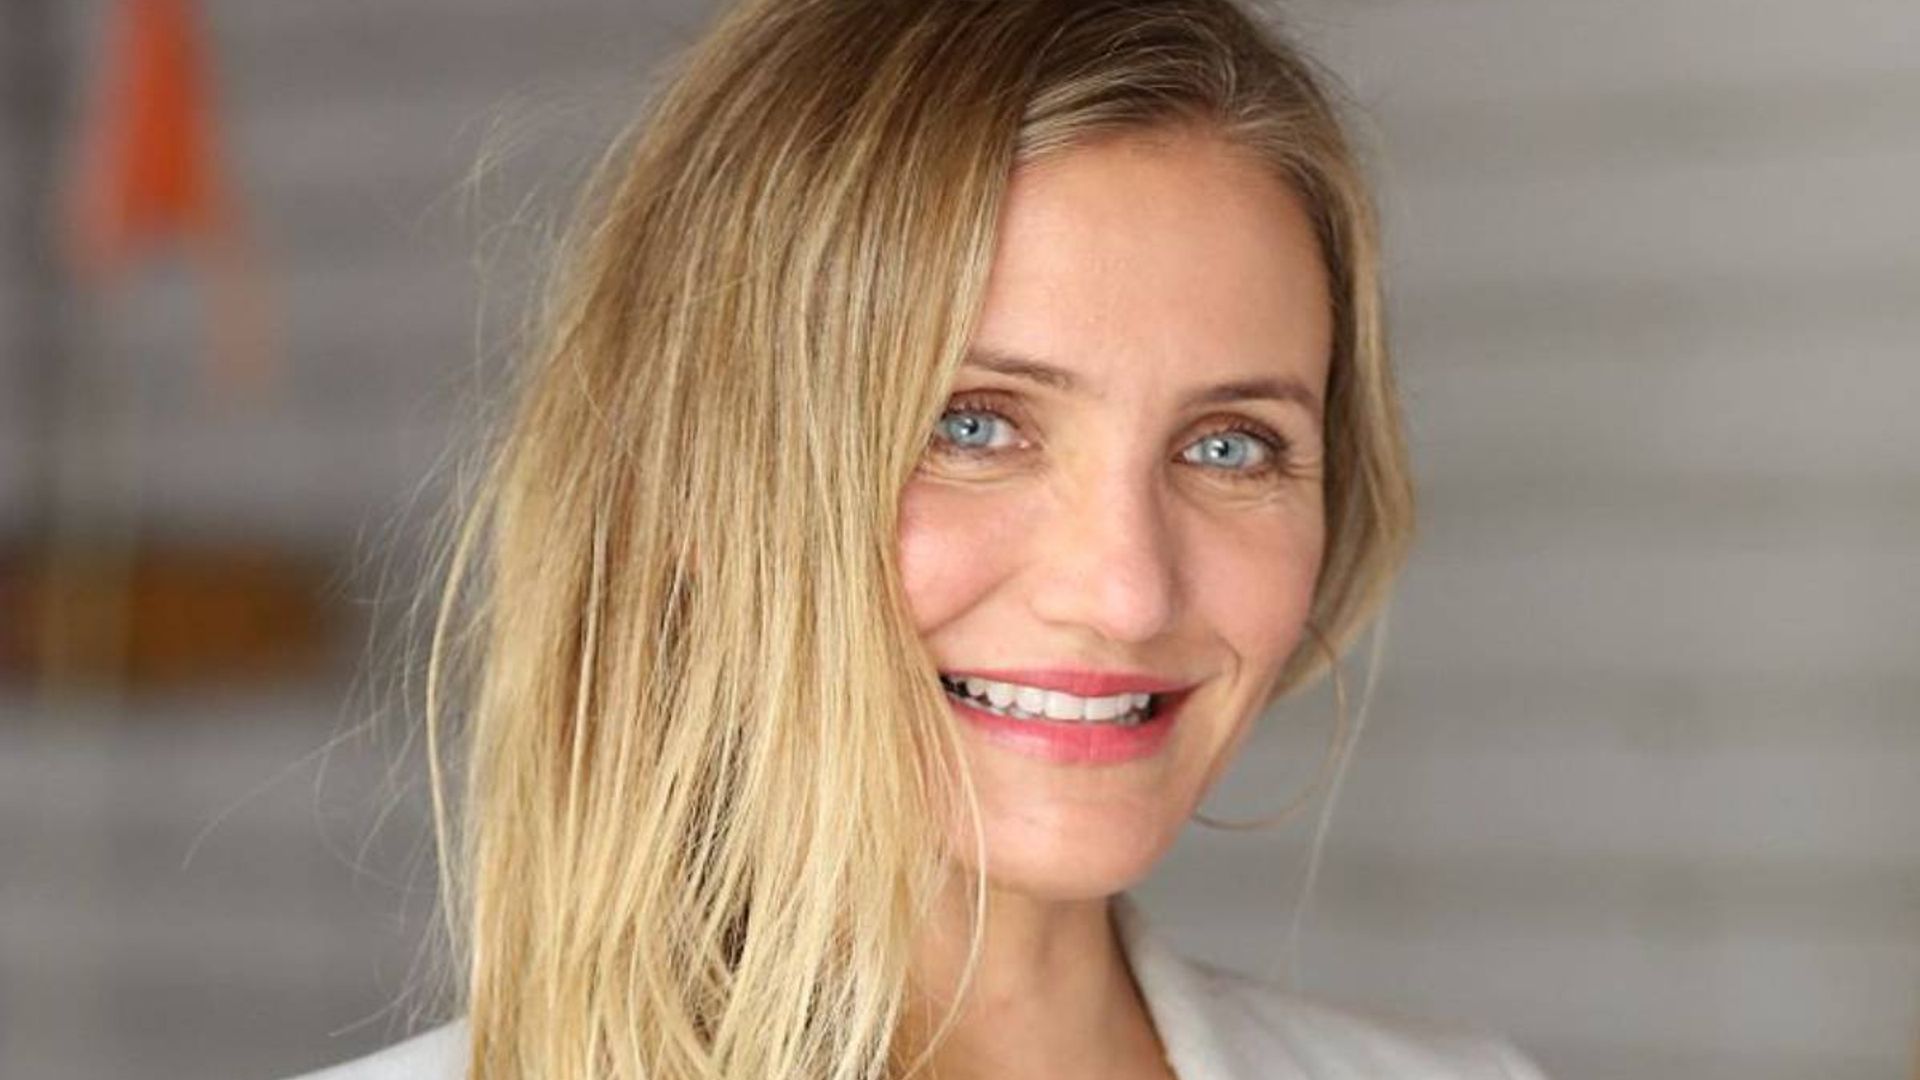 Cameron Diaz shares exceptionally rare picture of life with daughter